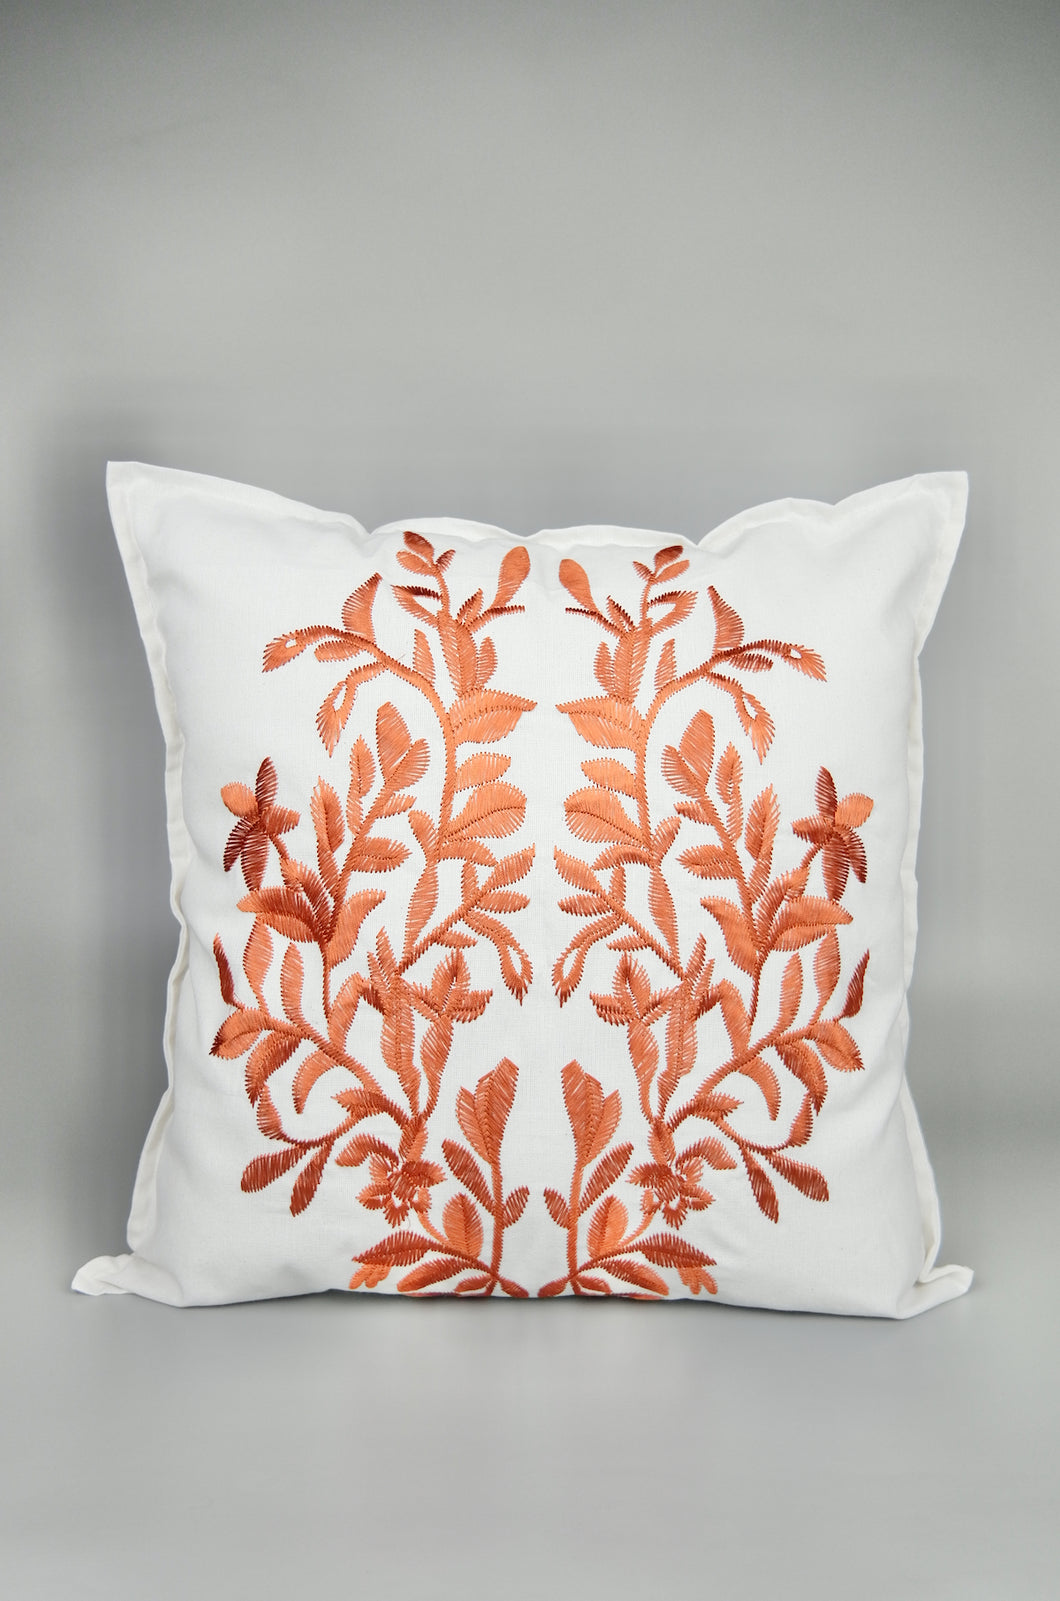 Cecile on Light Canvas Cushion Cover